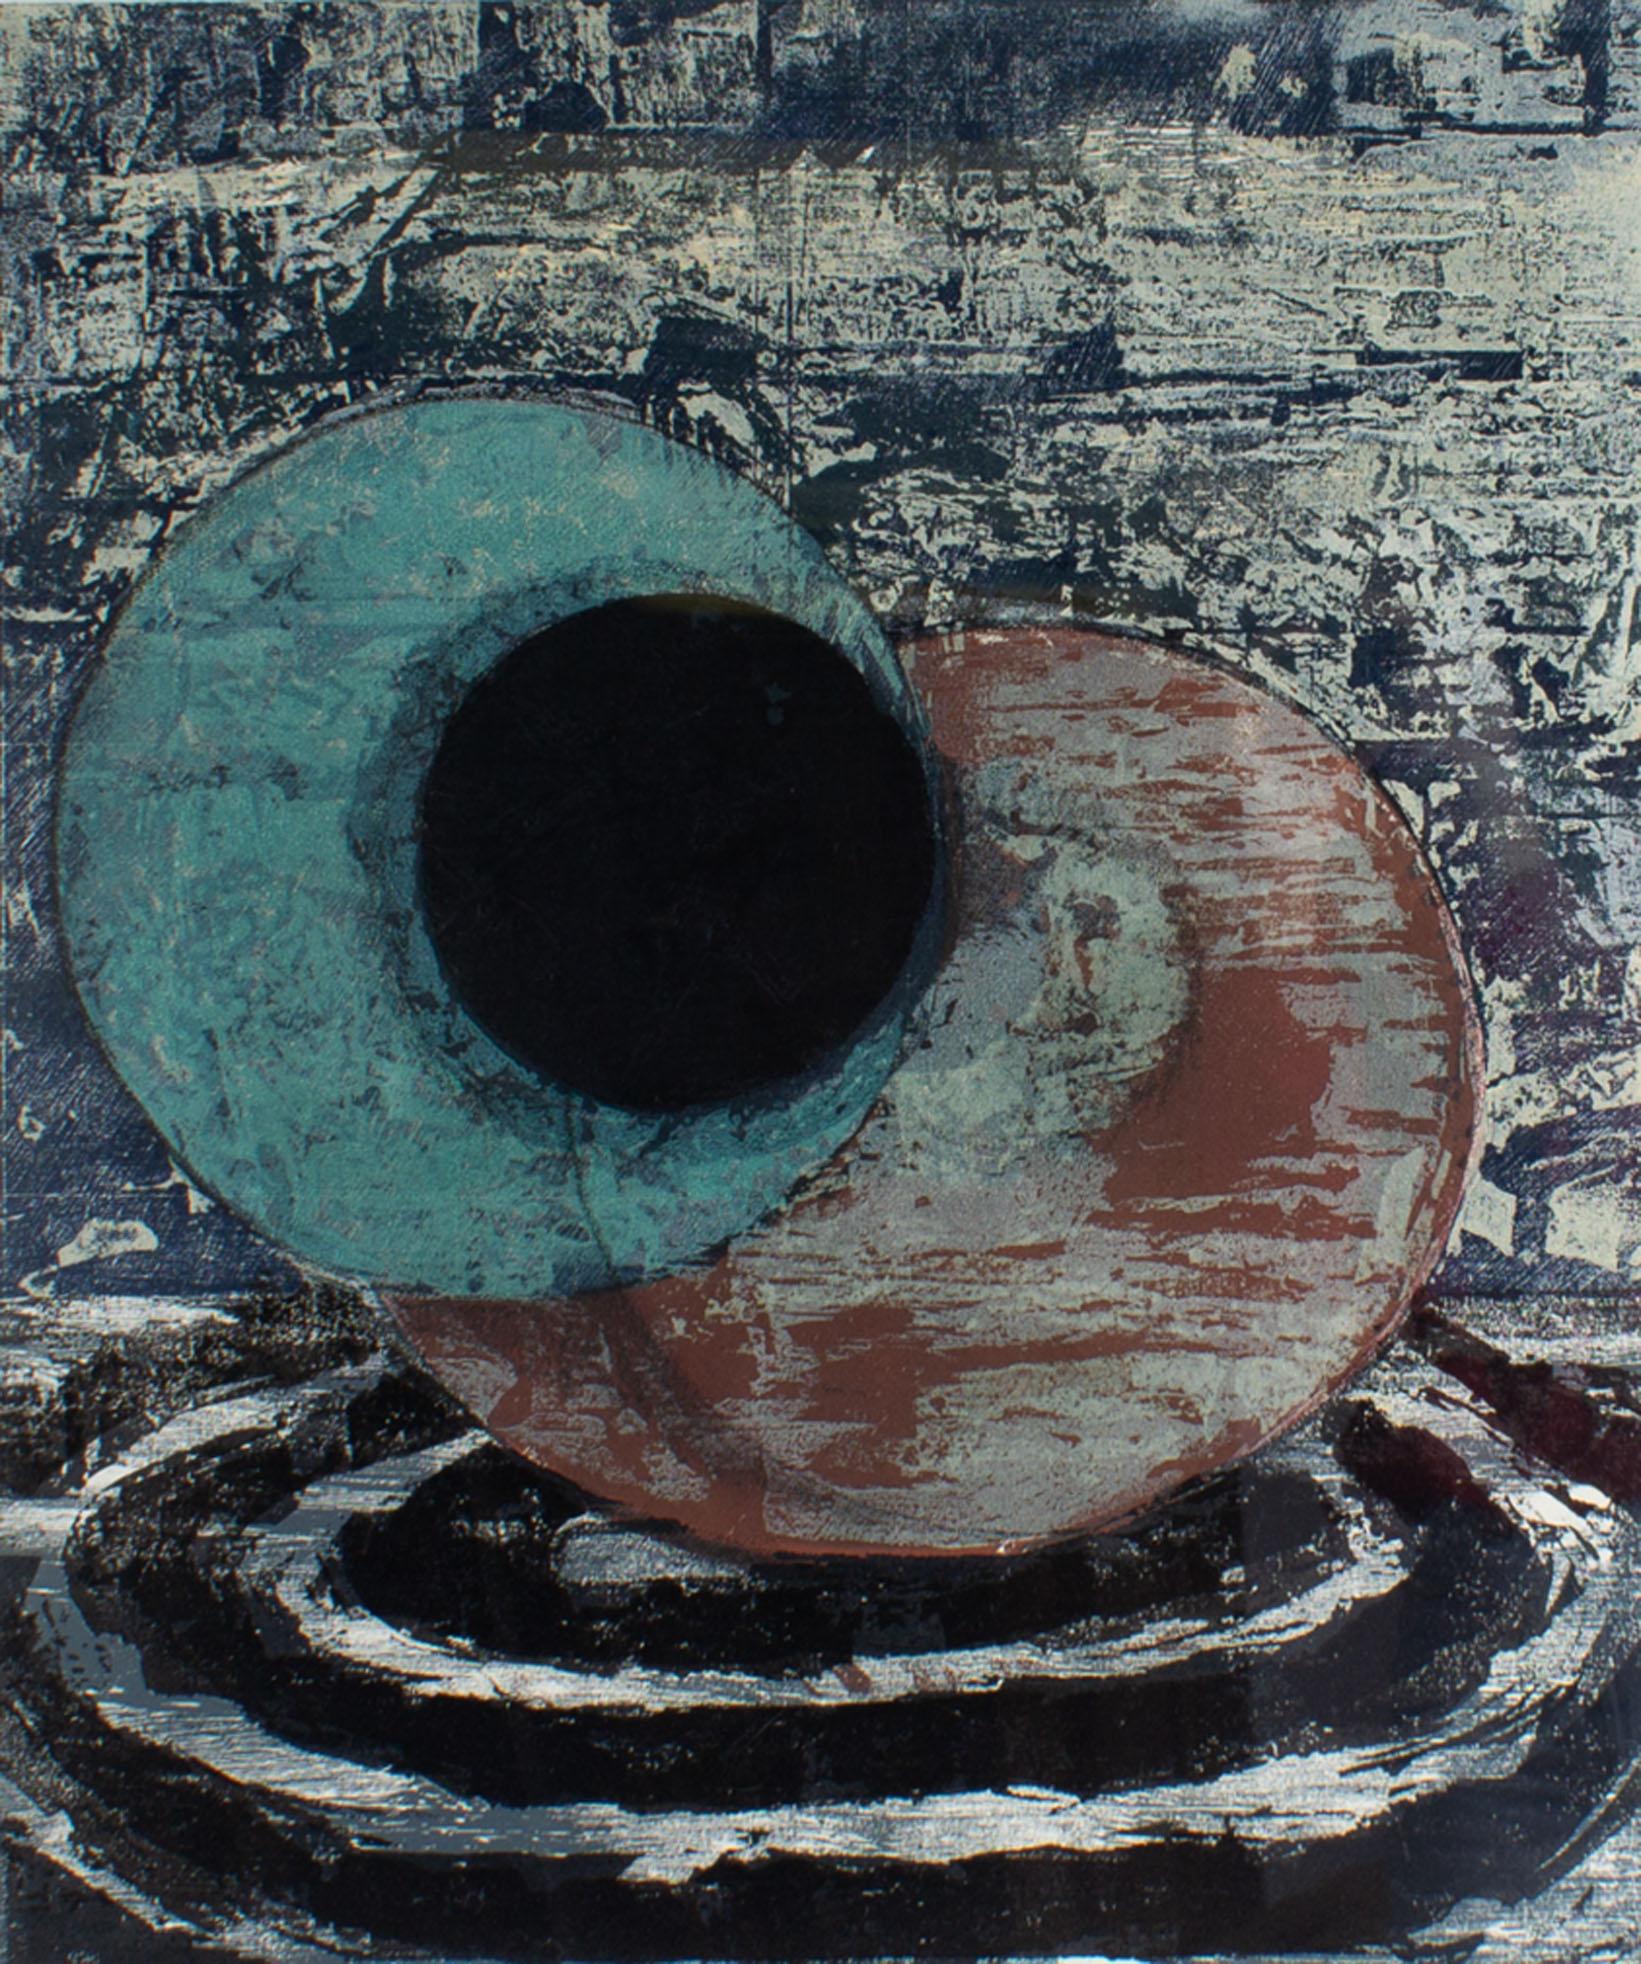 A 1985 abstract lithograph titled Echo Park by the American artist Michael David (born 1954). The work features two circular shapes at the center of the composition in shades of blue, black, and red. The lower half of the work has a circular striped